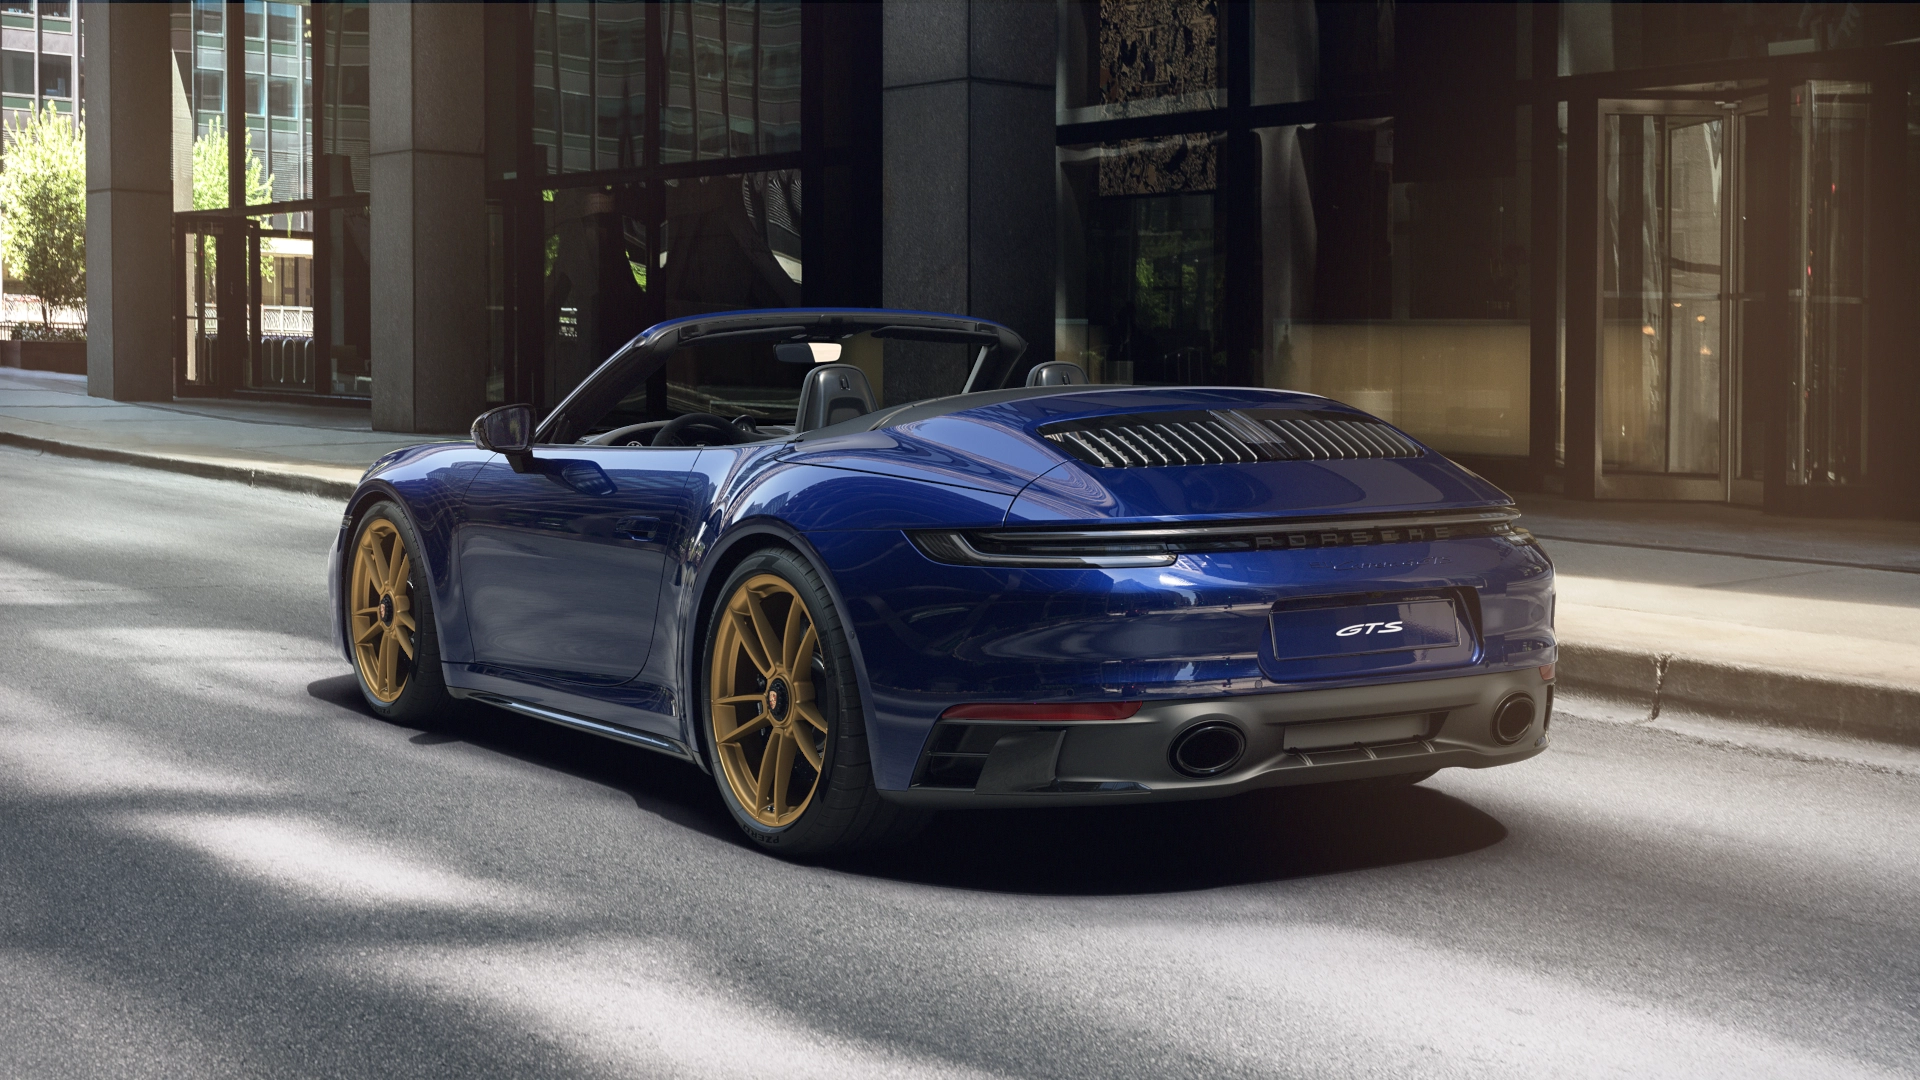 911 Carrera 4 GTS Cabriolet back view